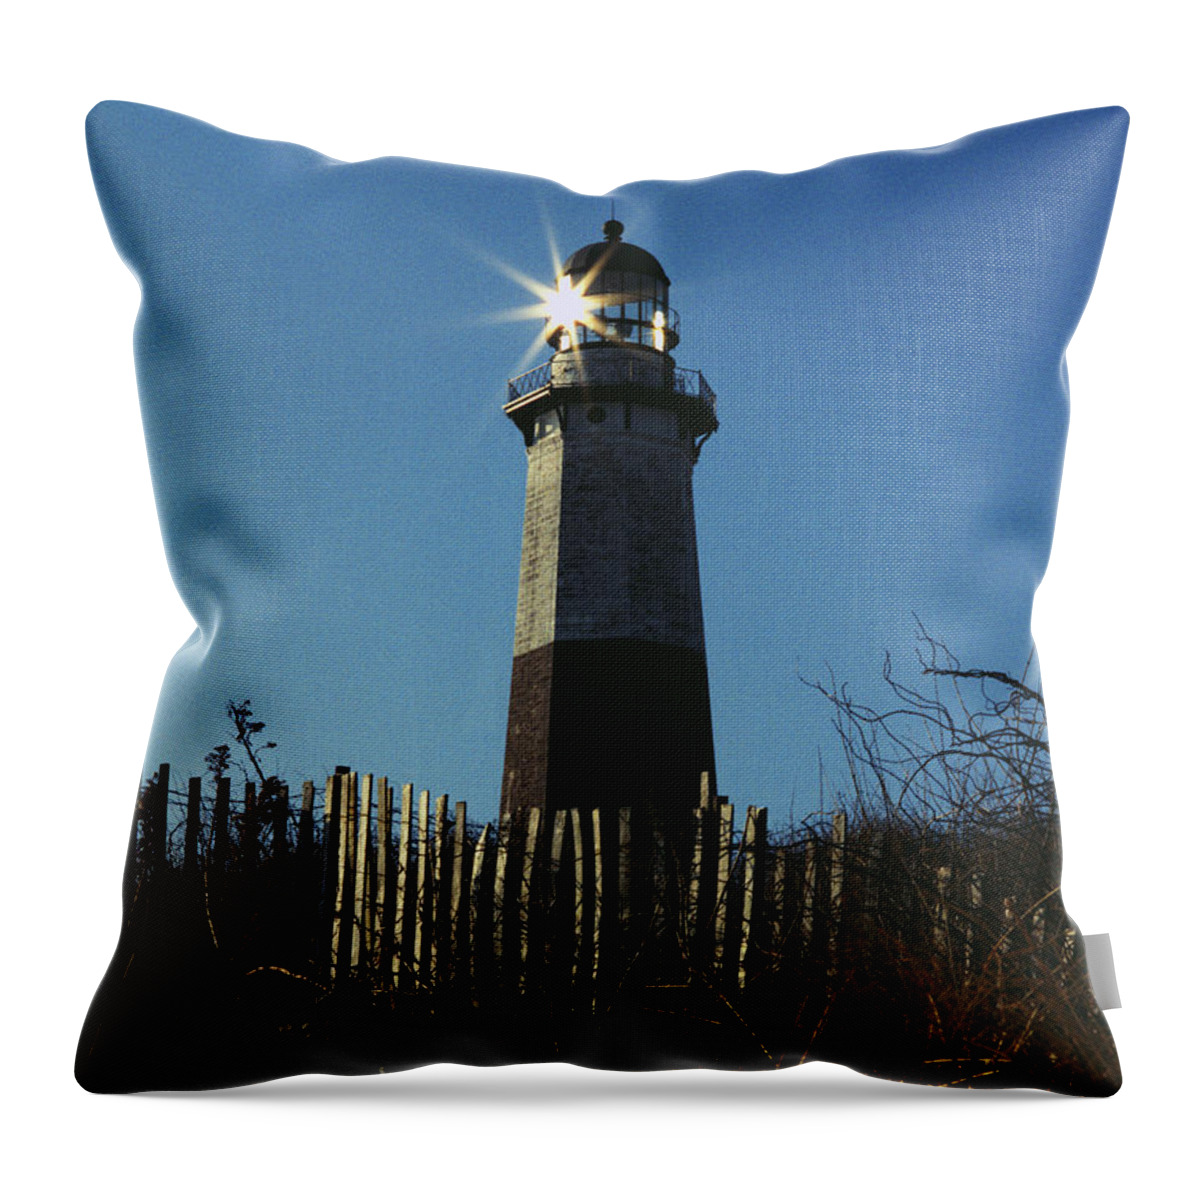 Lighthouse Throw Pillow featuring the digital art Montauk Lighthouse by Jack Ader